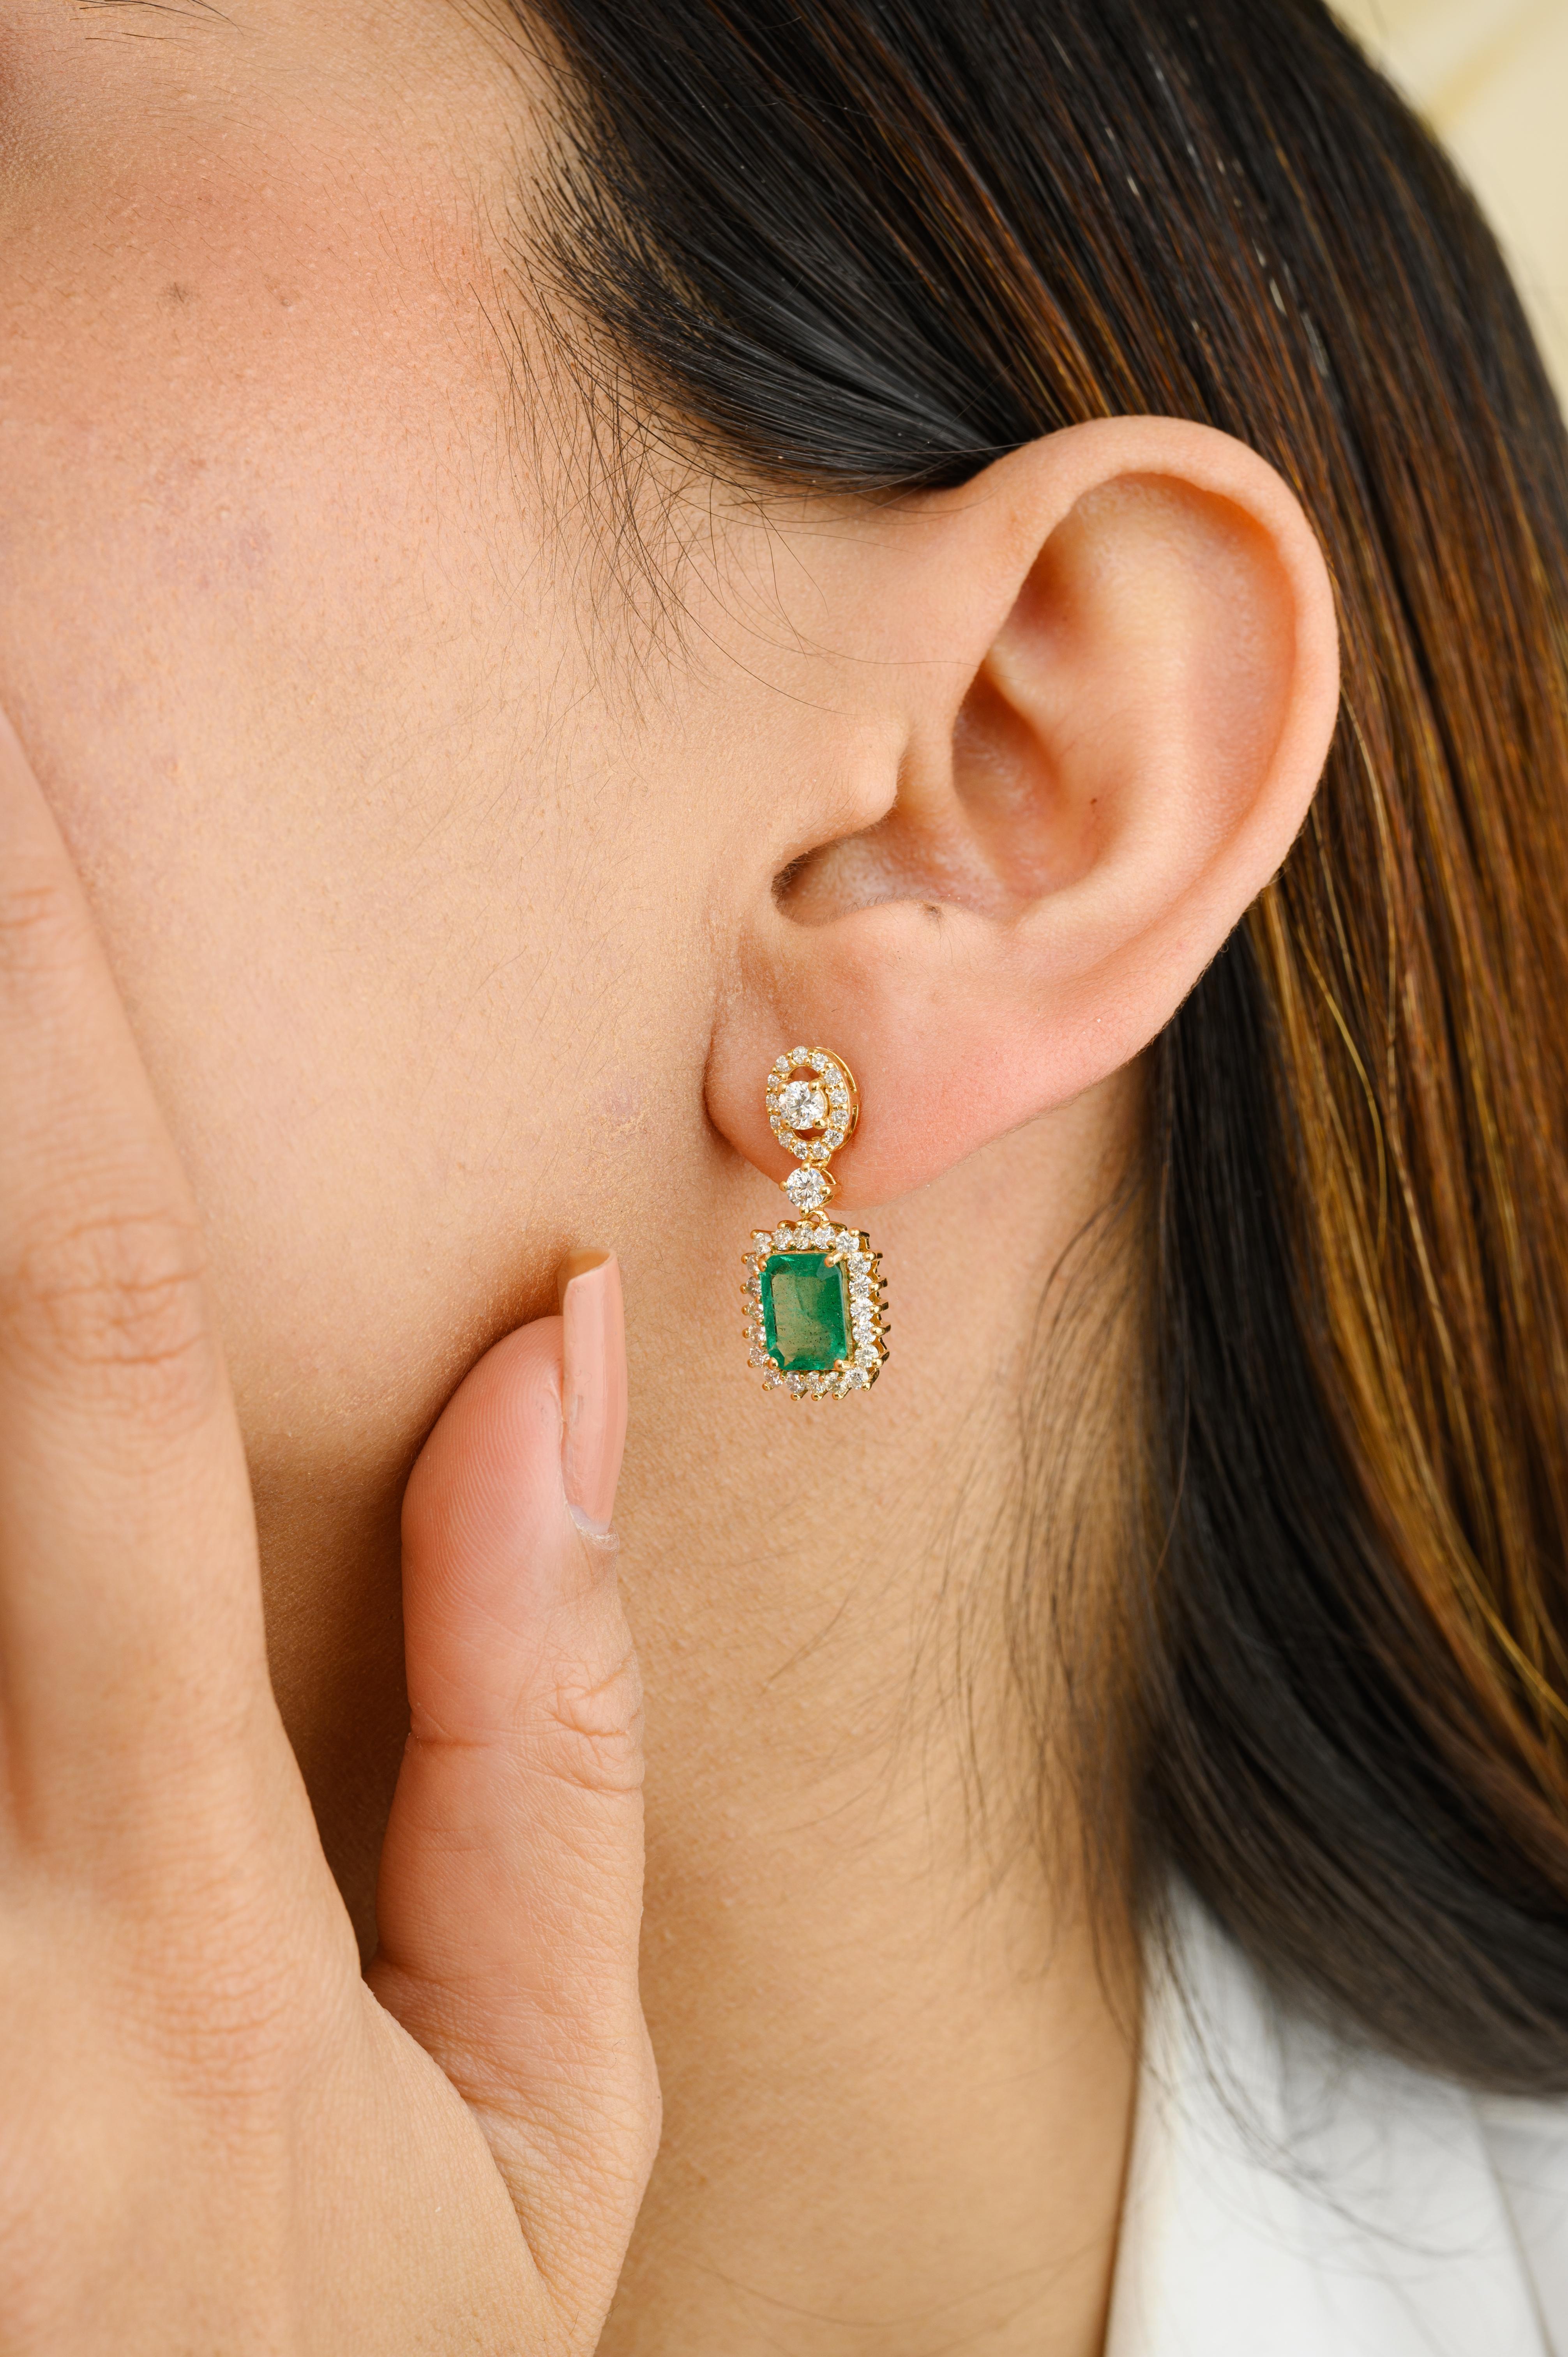 Certified Octagon Emerald and Diamond Halo Dangle Earrings in 18K Gold to make a statement with your look. You shall need dangle earrings to make a statement with your look. These earrings create a sparkling, luxurious look featuring octagon cut